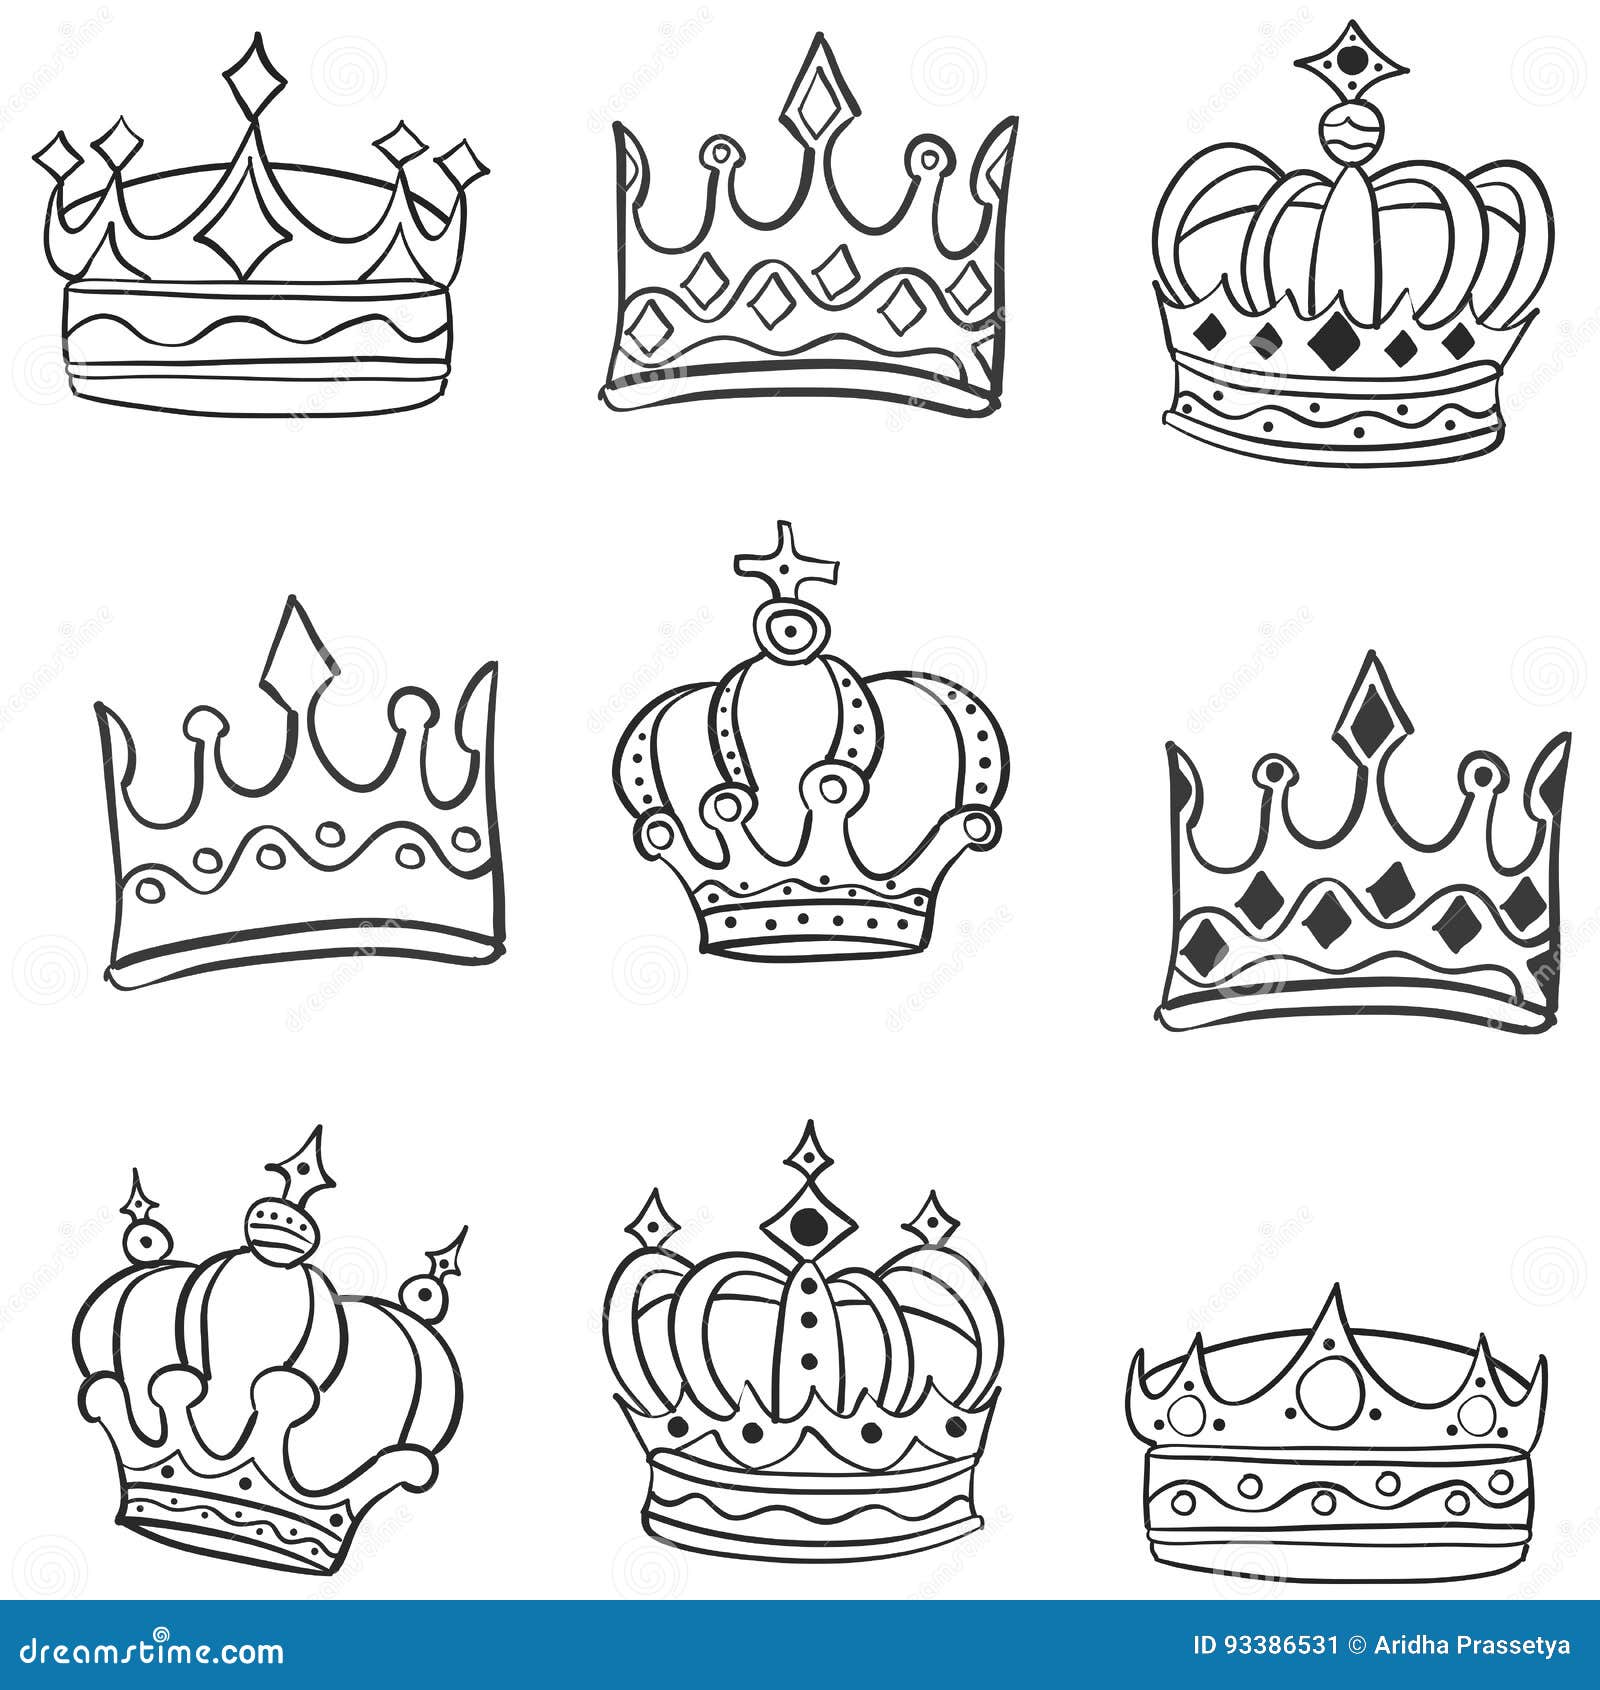 Doodle of Various Crowns Hand Draw Stock Vector - Illustration of ...